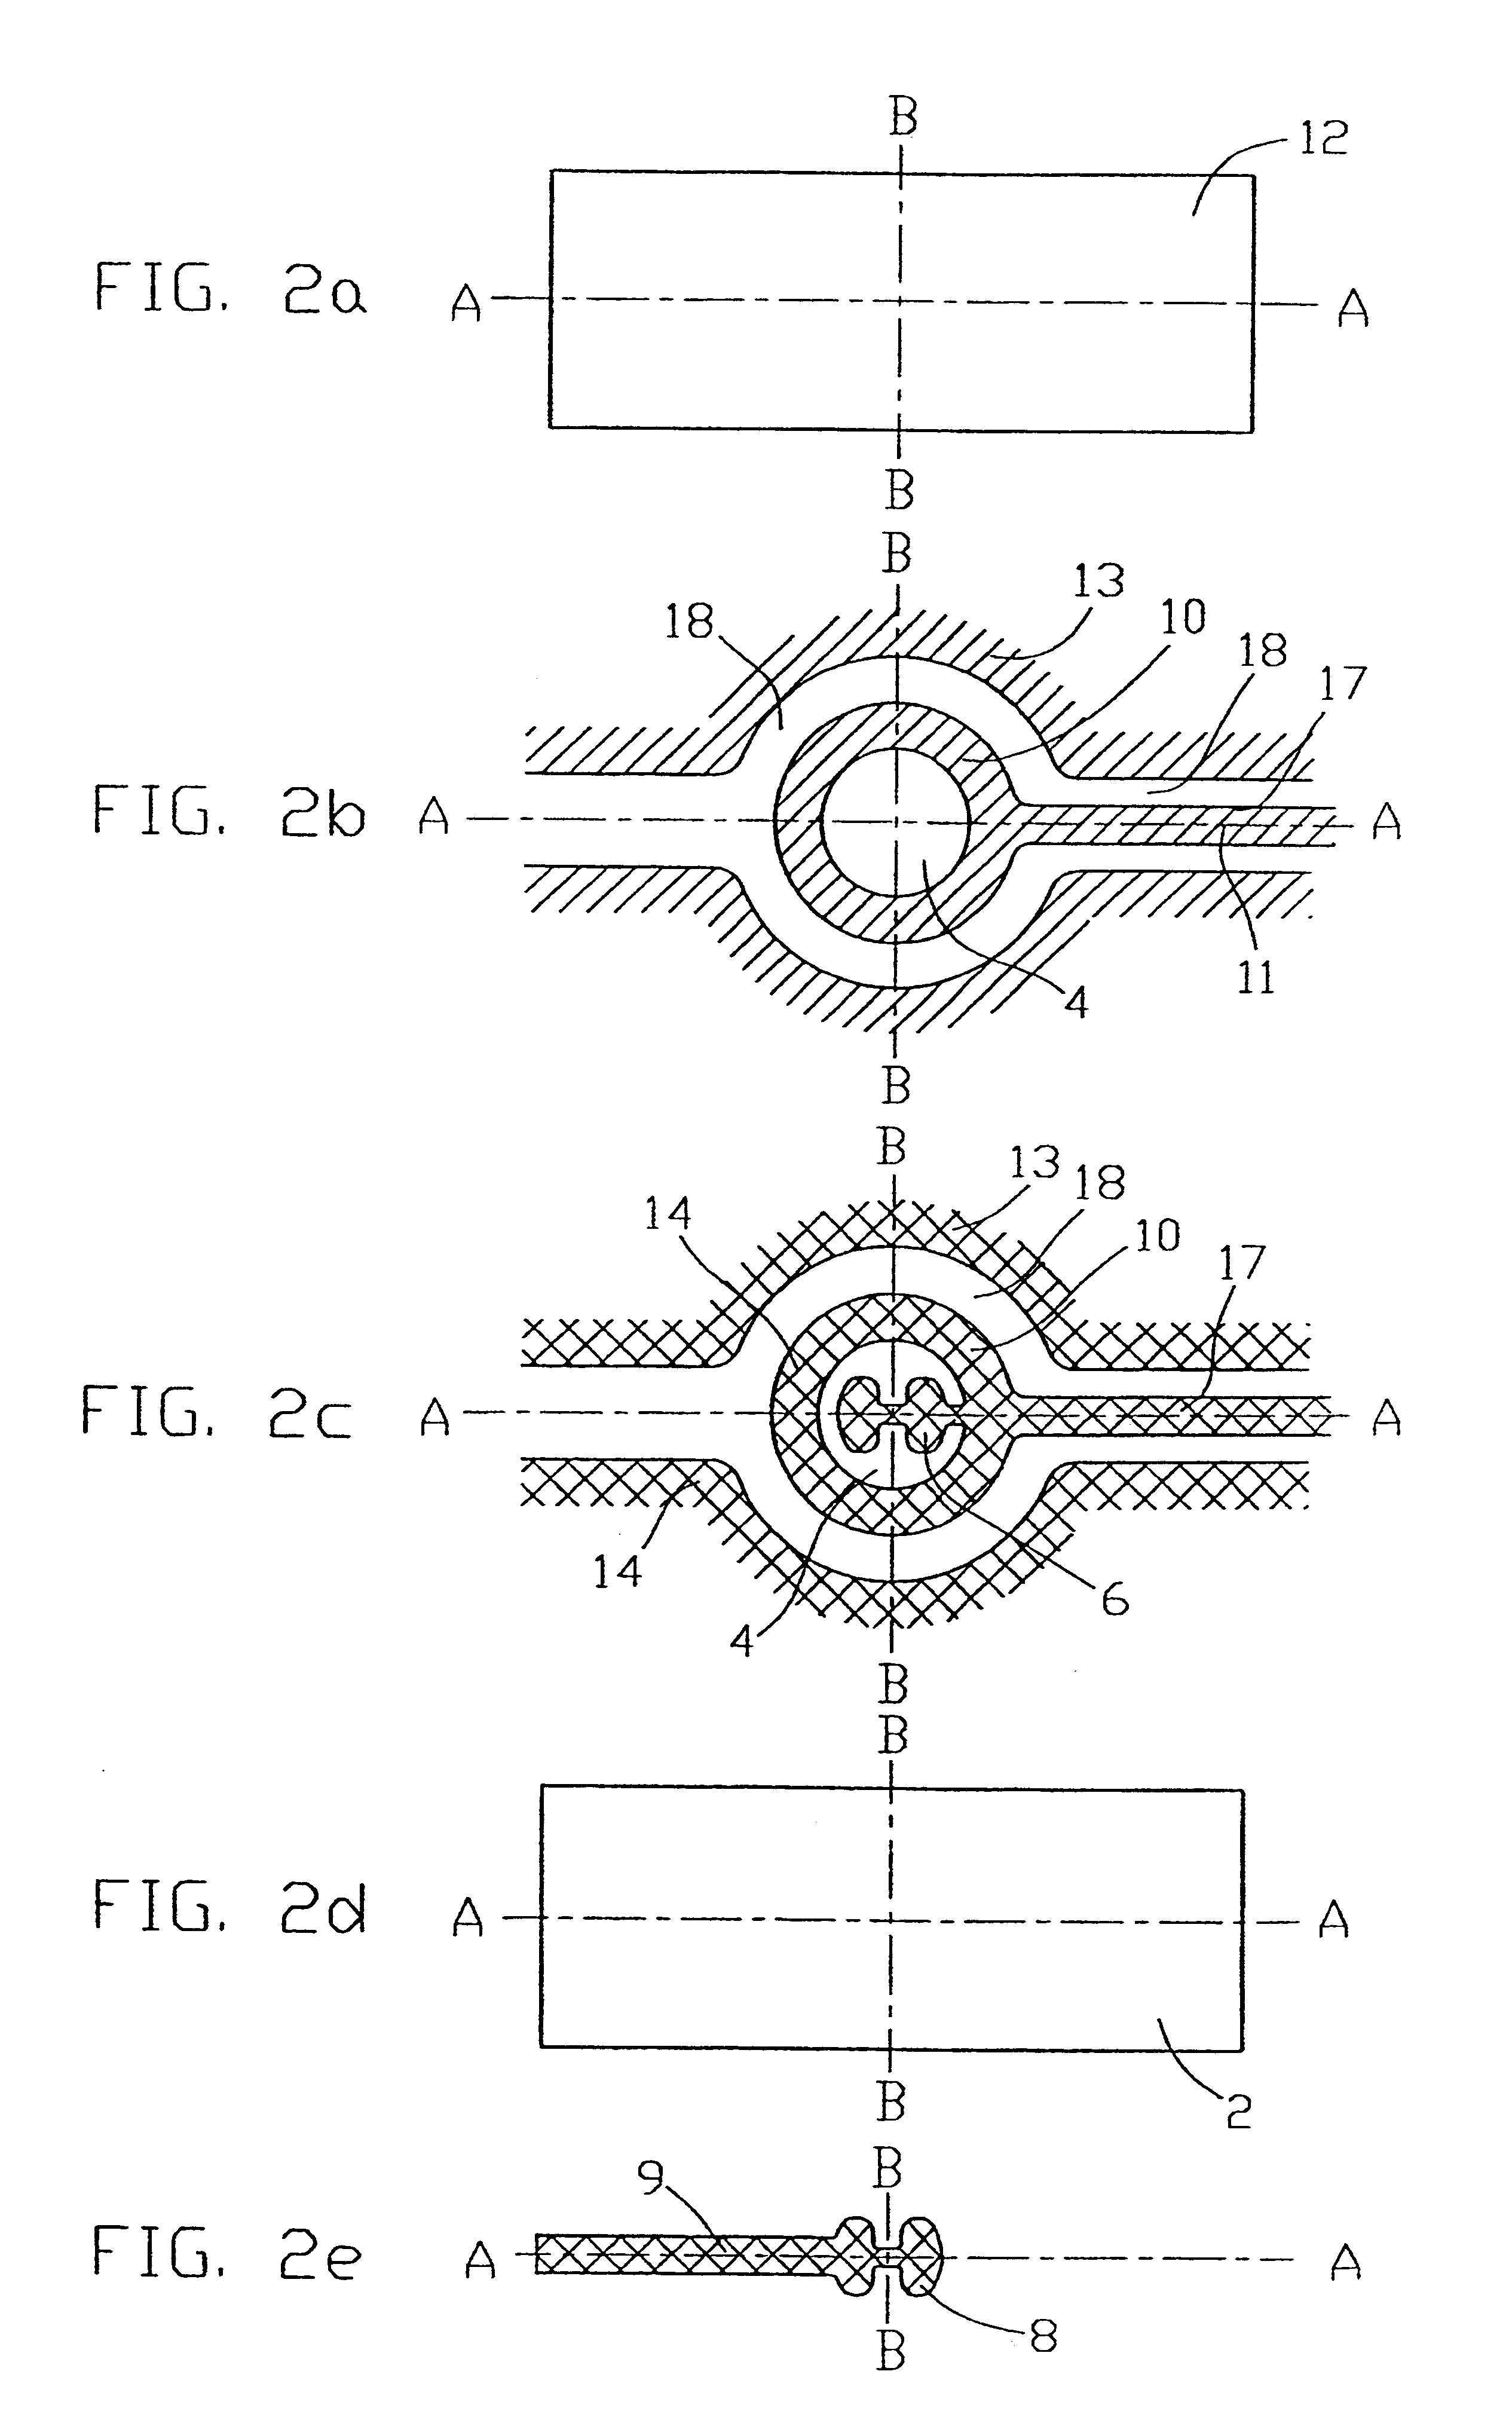 System and method for monitoring pressure, flow and constriction parameters of plumbing and blood vessels